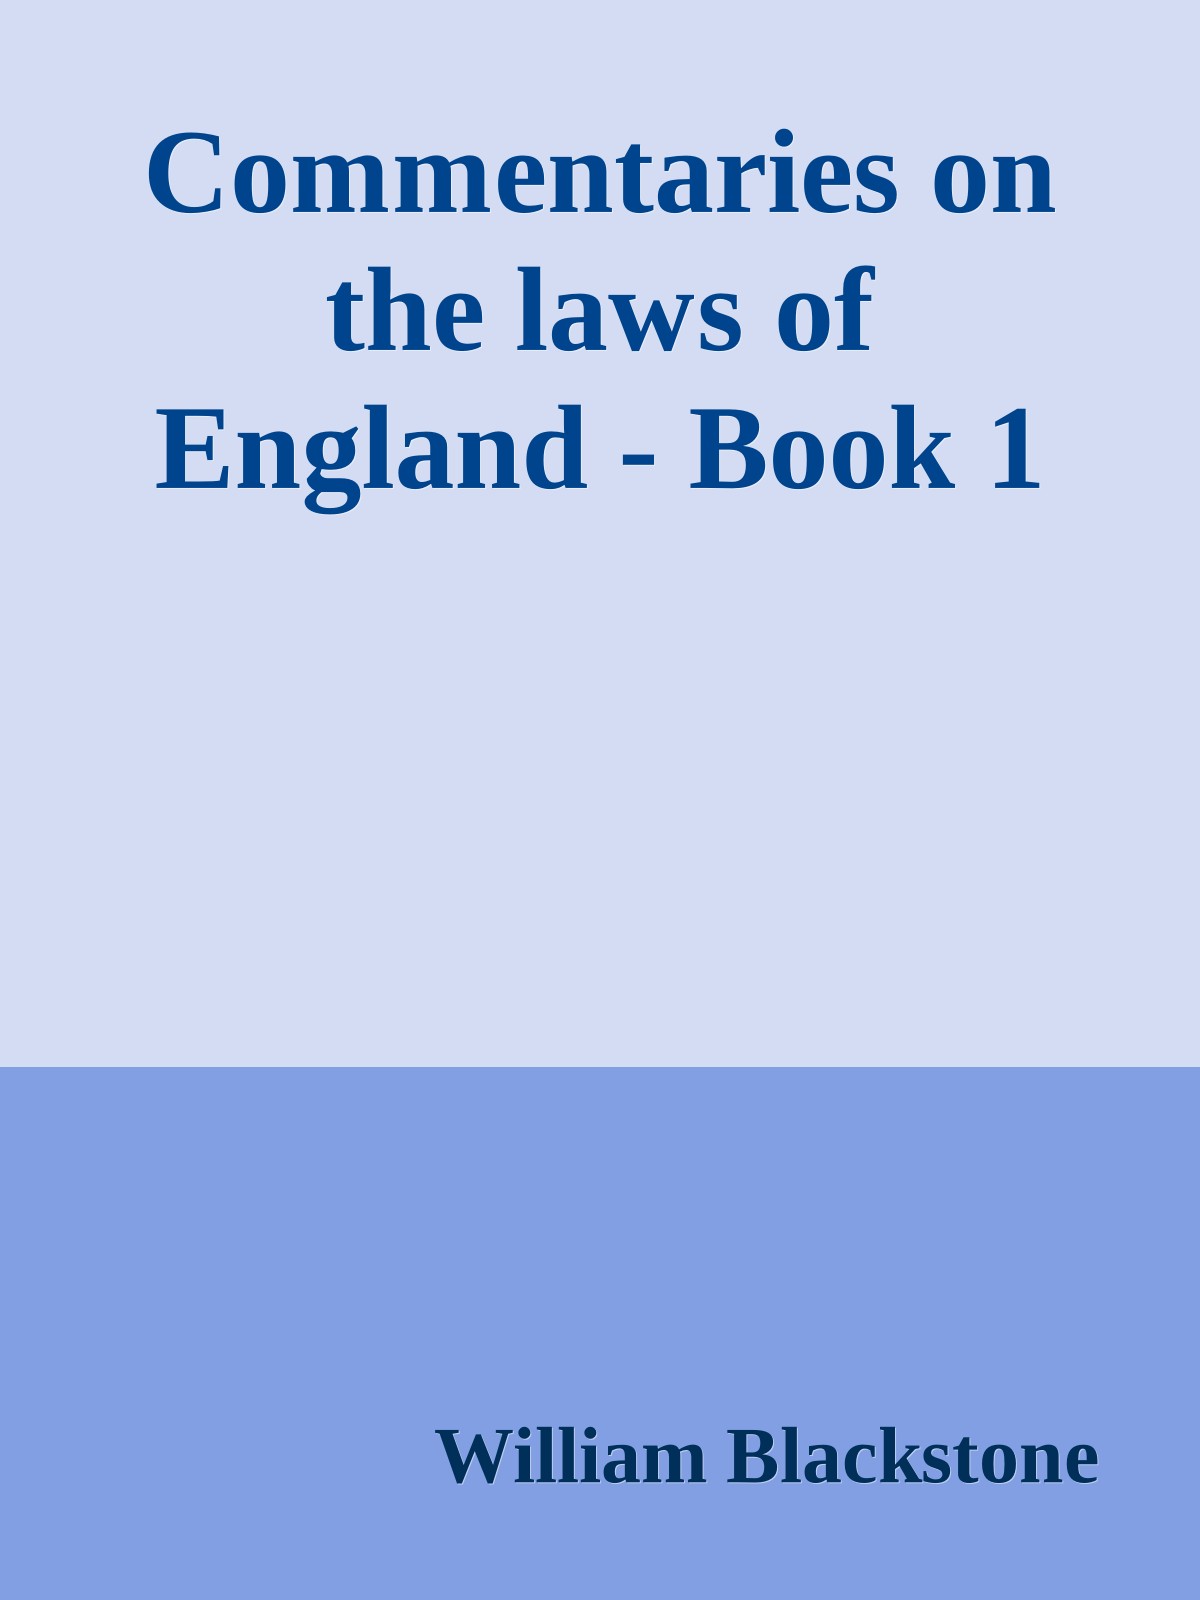 Commentaries on the laws of England - Book 1